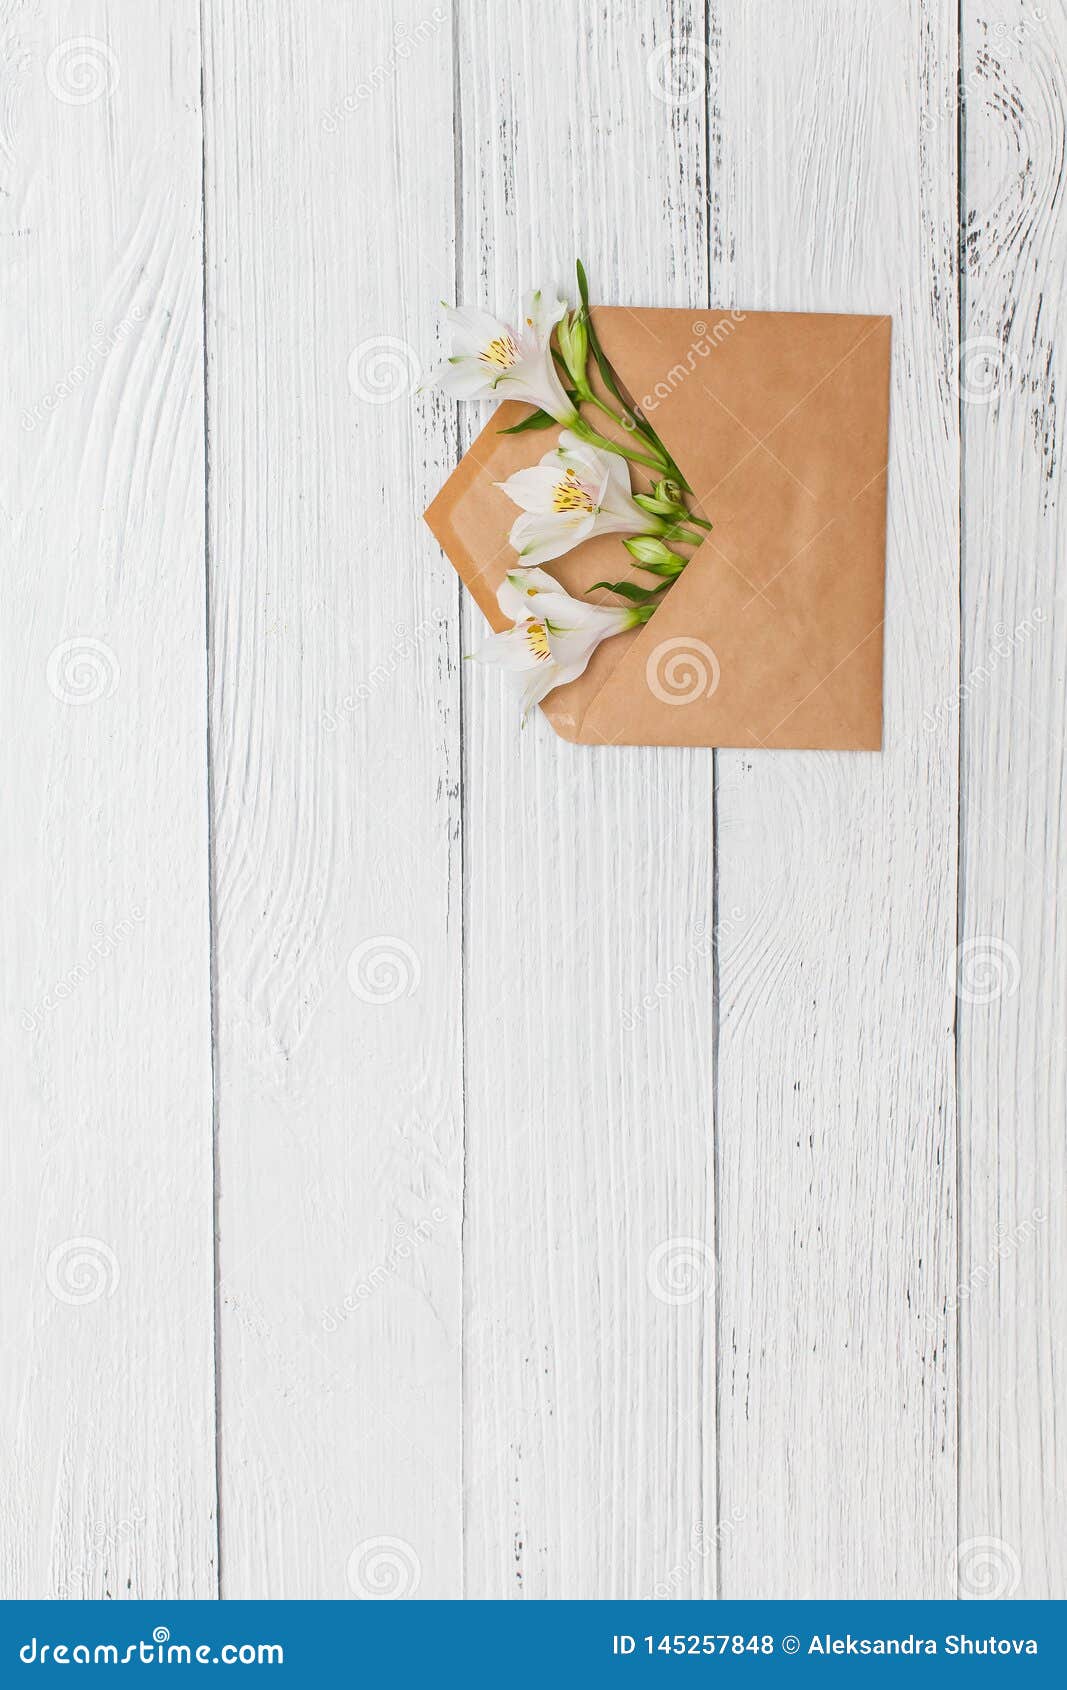 Flat lay with White lilies in craft envelope on old white wooden background